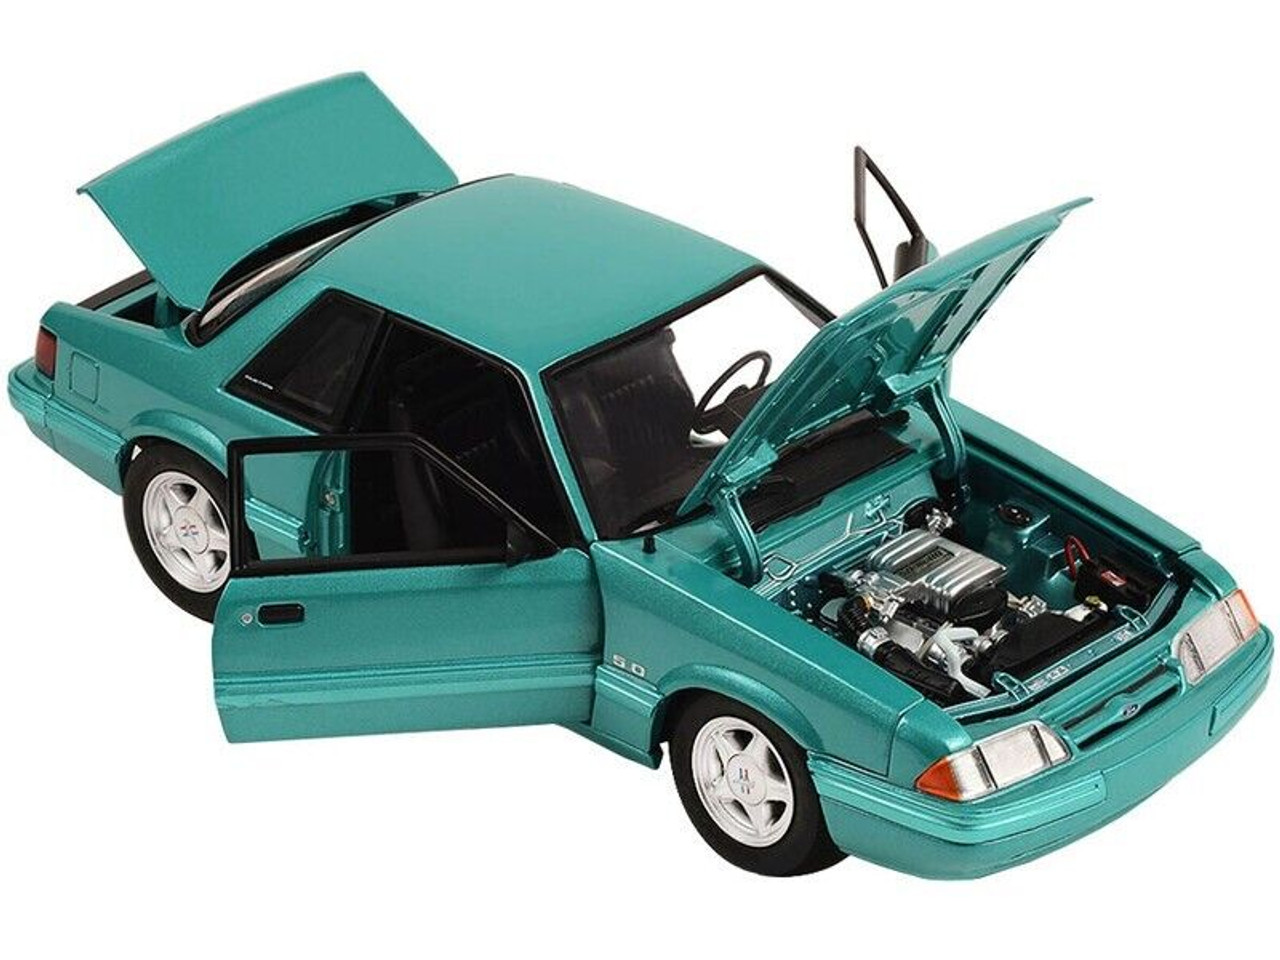 1/18 GMP 1993 Ford Mustang LX 5.0 (Calypso Green) Diecast Car Model